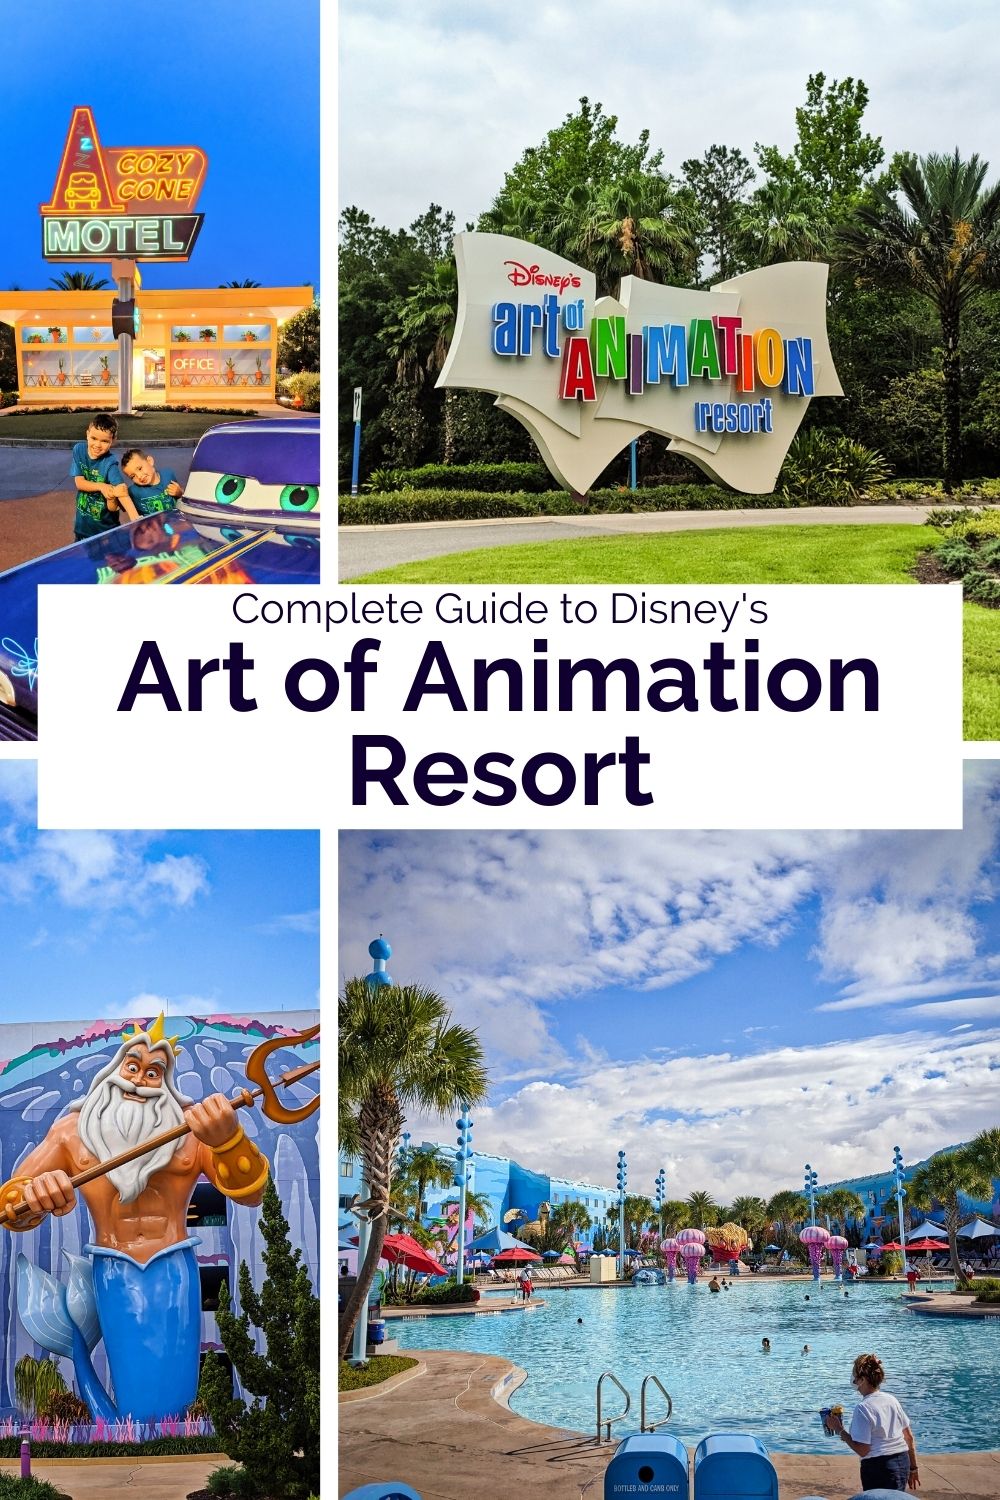 Review of Disney's Art of Animation Resort includes Cars, Lion King, Finding Nemo and Little Mermaid themed suites and rooms. A fun family hotel, Art of Animation is a Value Level Walt Disney World resort and is ideal for families visiting on a budget (or not).